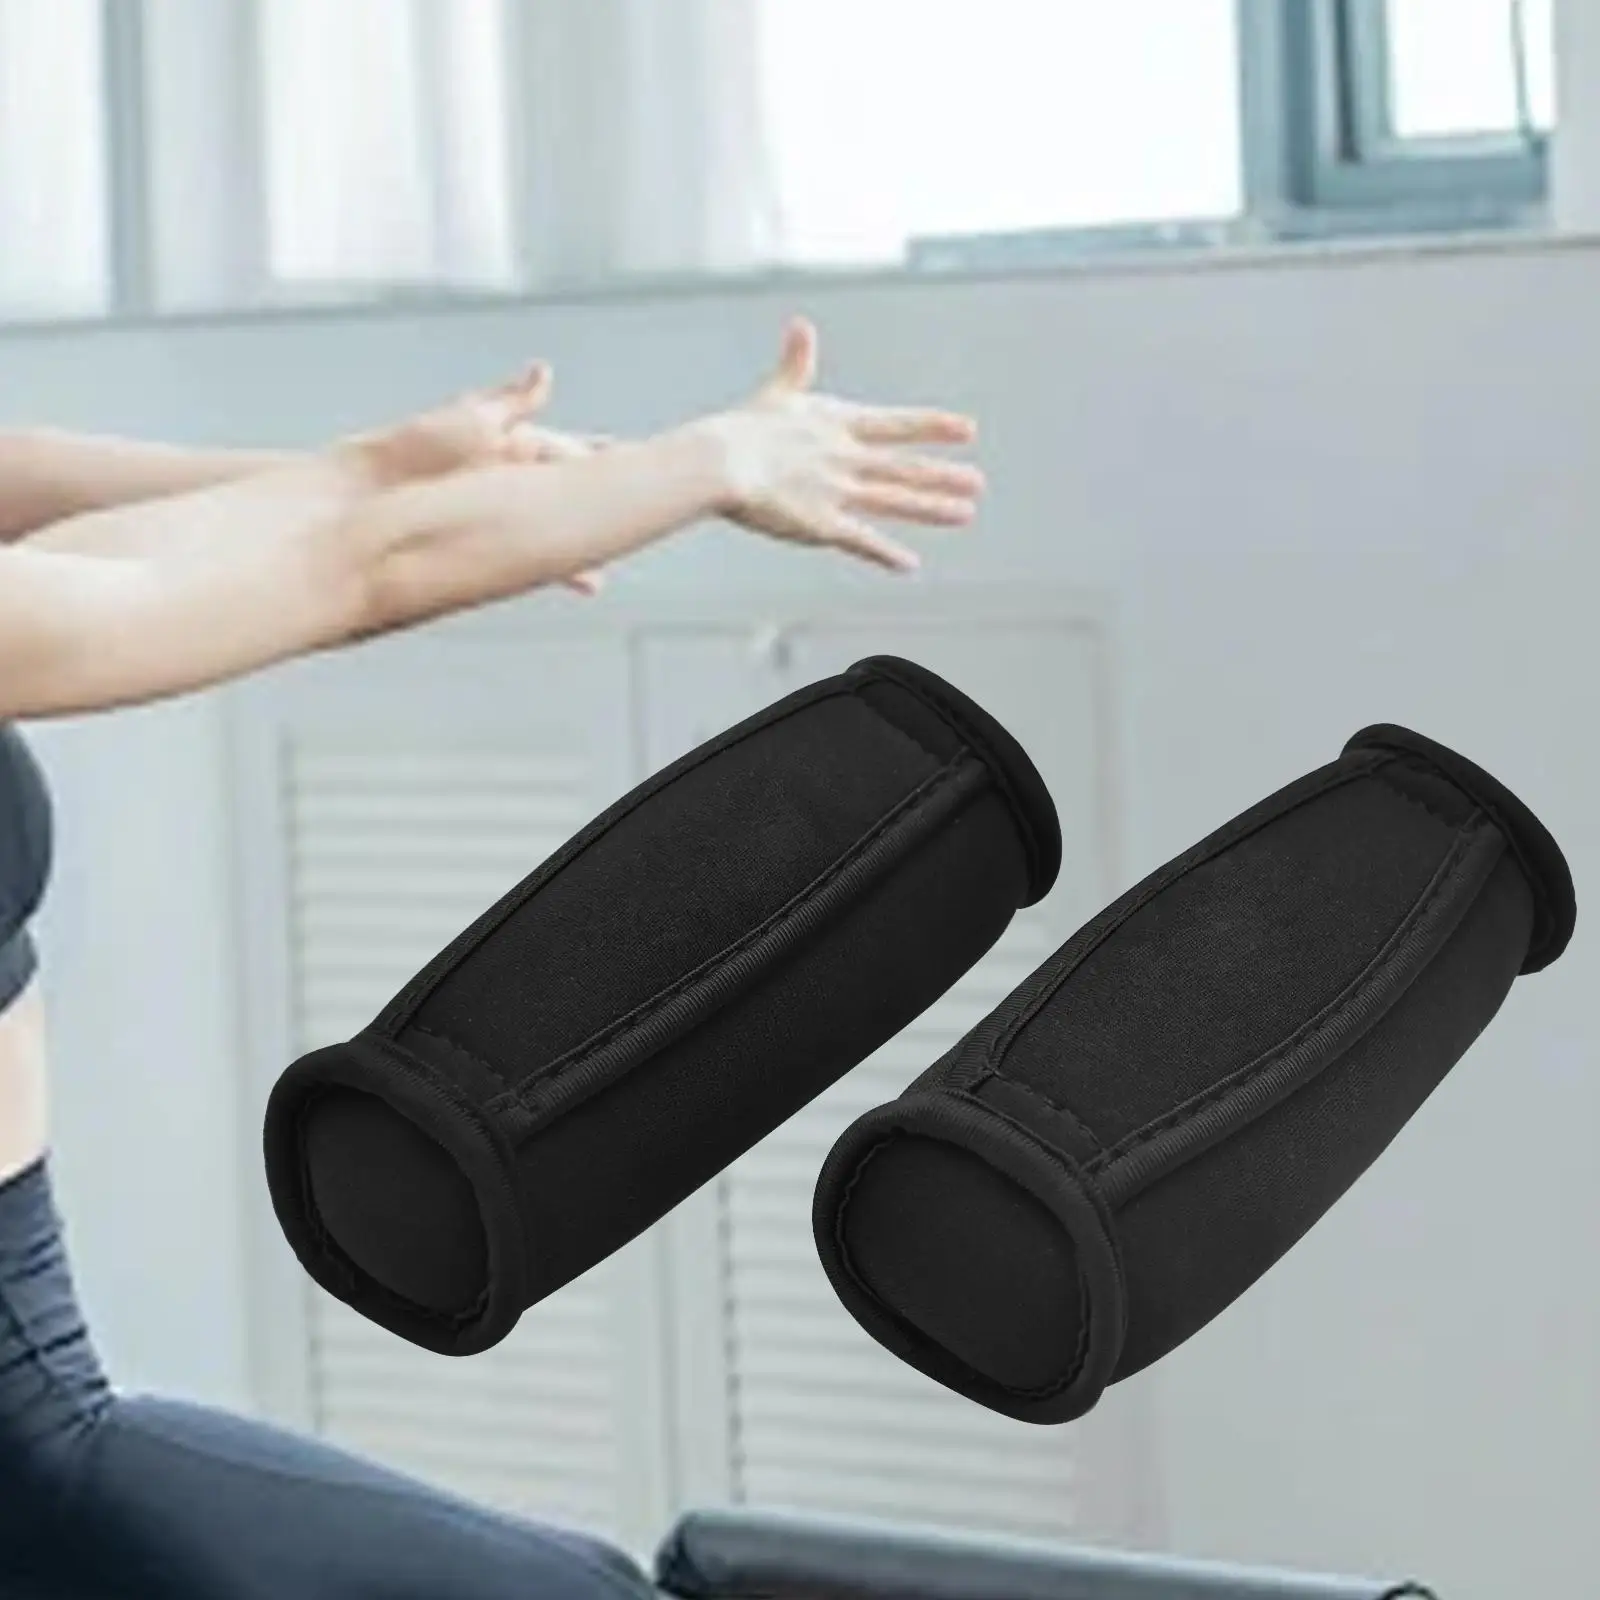 Wrist Weights Set of 2 Wearable to Strengthen The Hands Forearm Arm Weights for